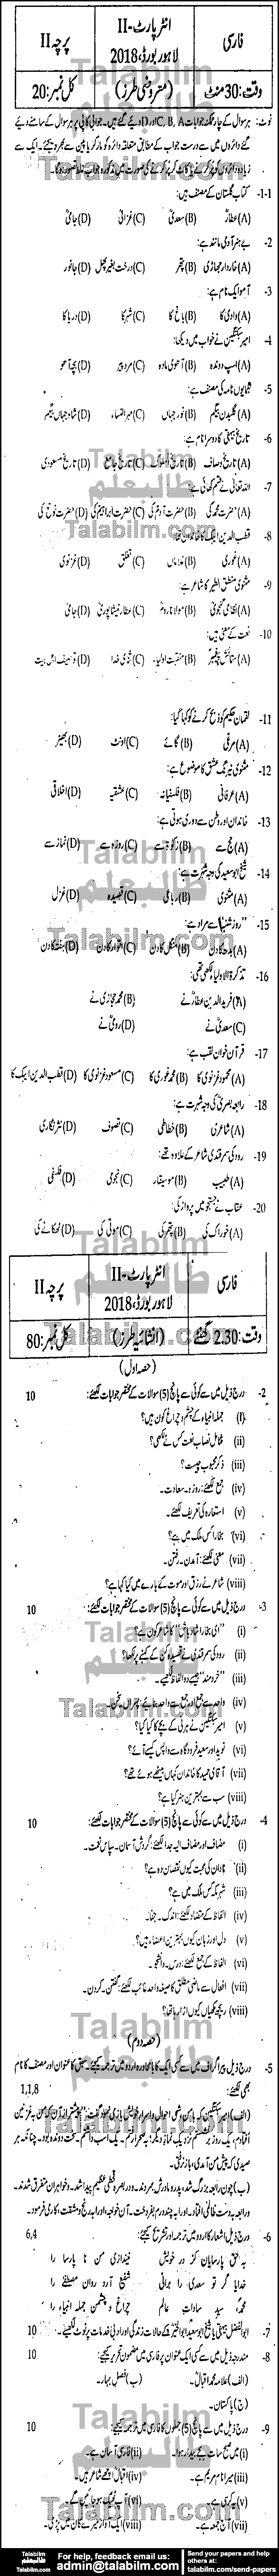 Persian 0 past paper for Group-II 2018